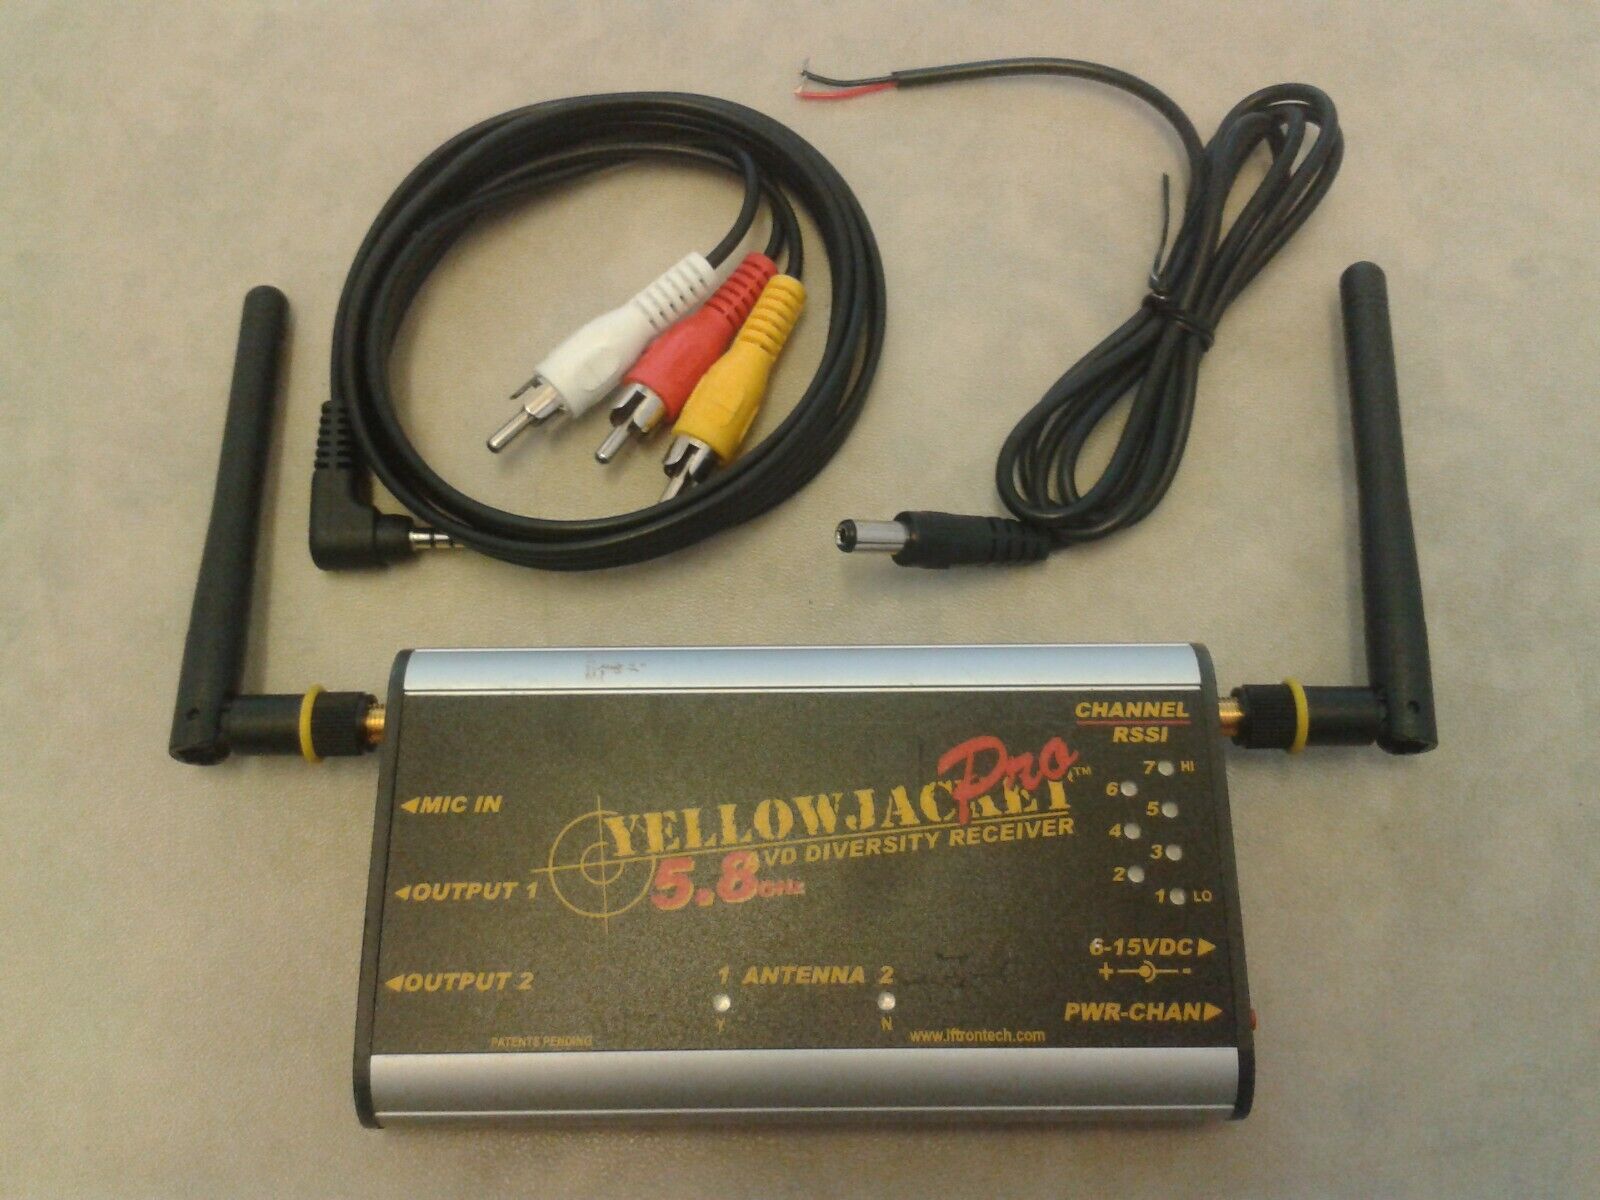 Yellow Jacket PRO FPV Receiver for Drones